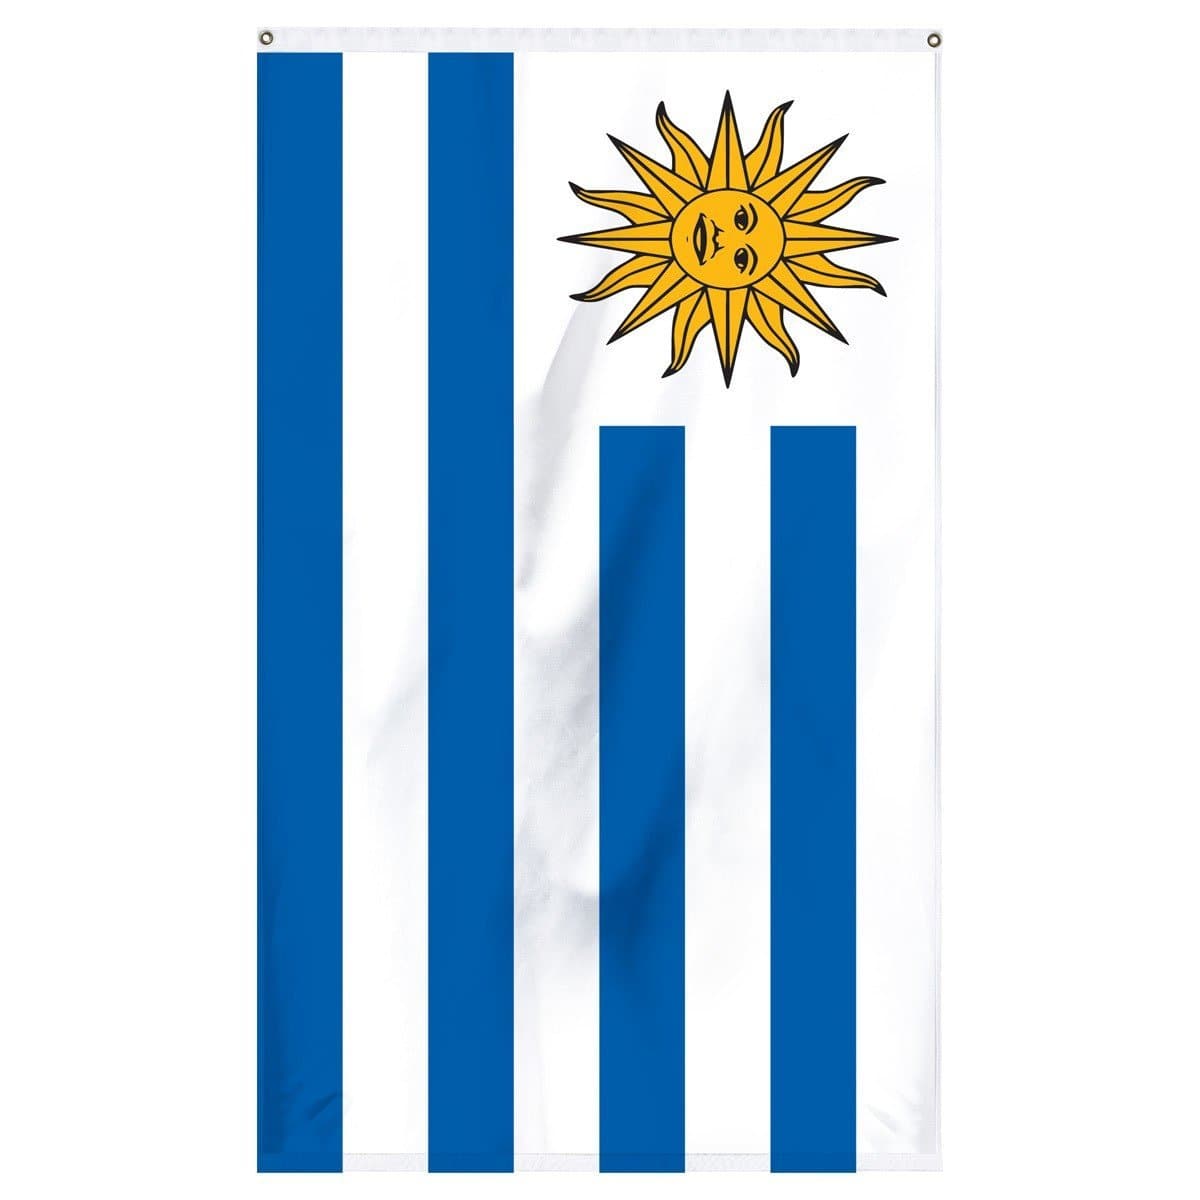 Uruguay National Flag for sale to buy online from Atlantic Flagpole. Blue and white flag with a smiling sun in the corner.